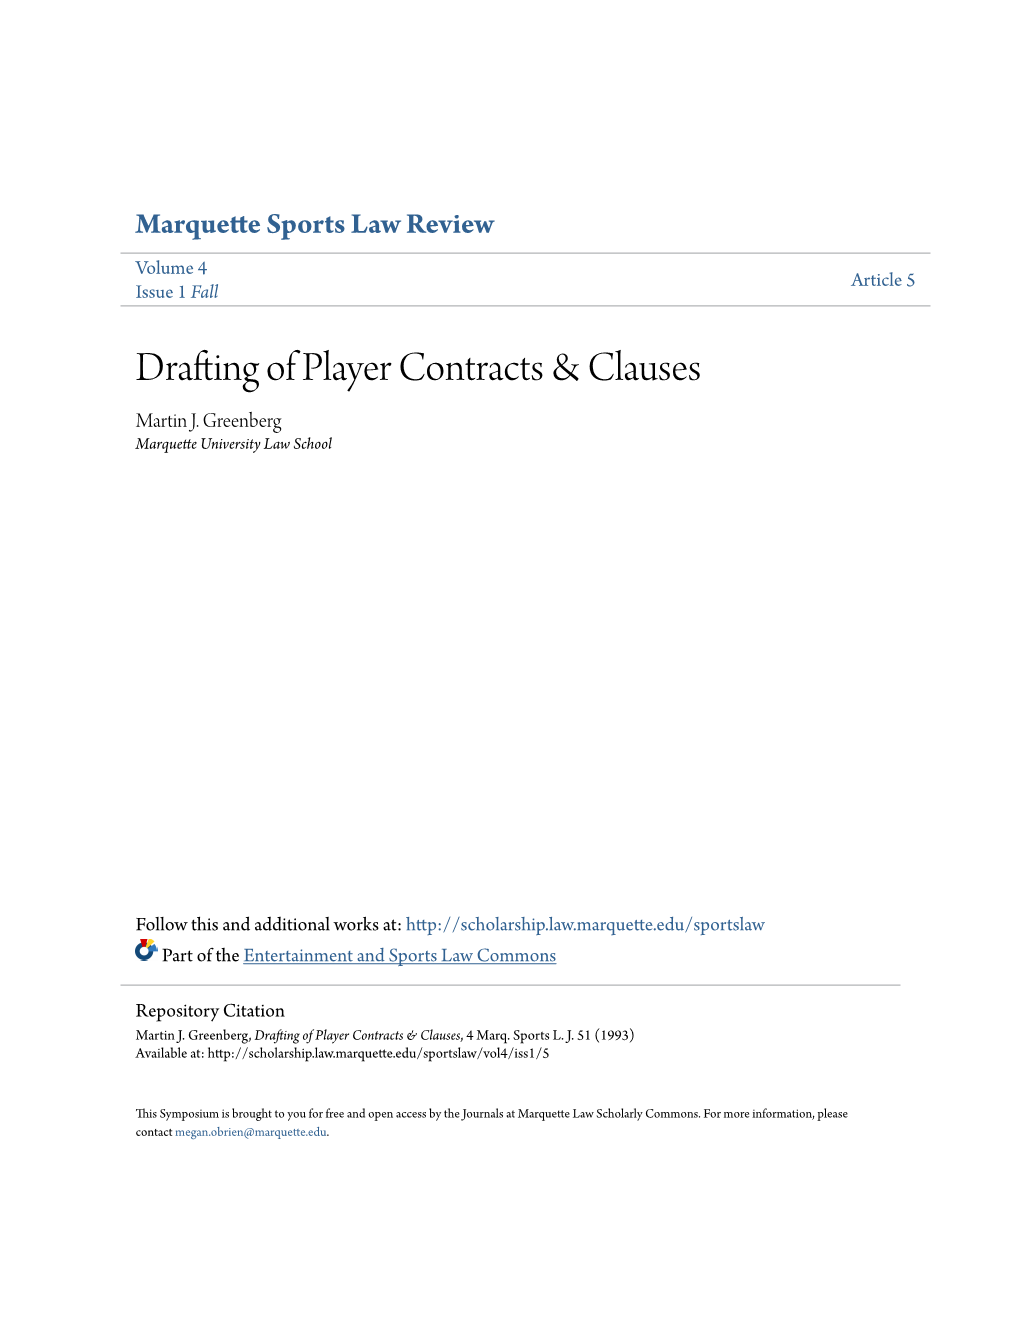 Drafting of Player Contracts & Clauses